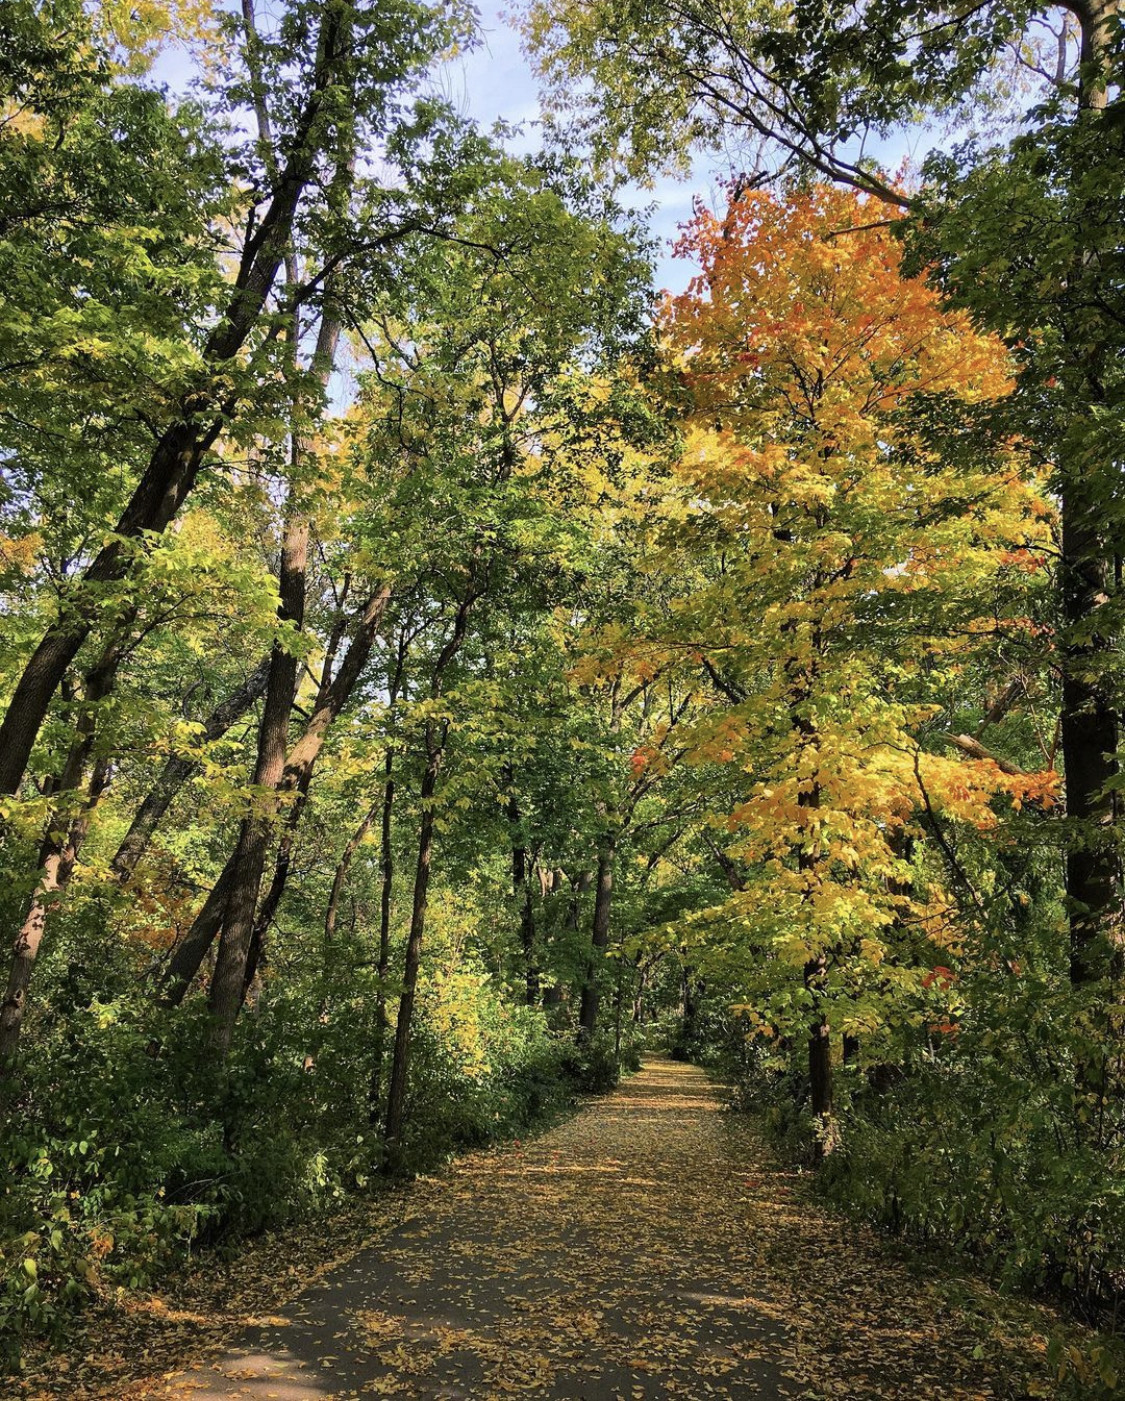 Paved Bike trail through wooded area along Dry Run Creek, Fall colors 